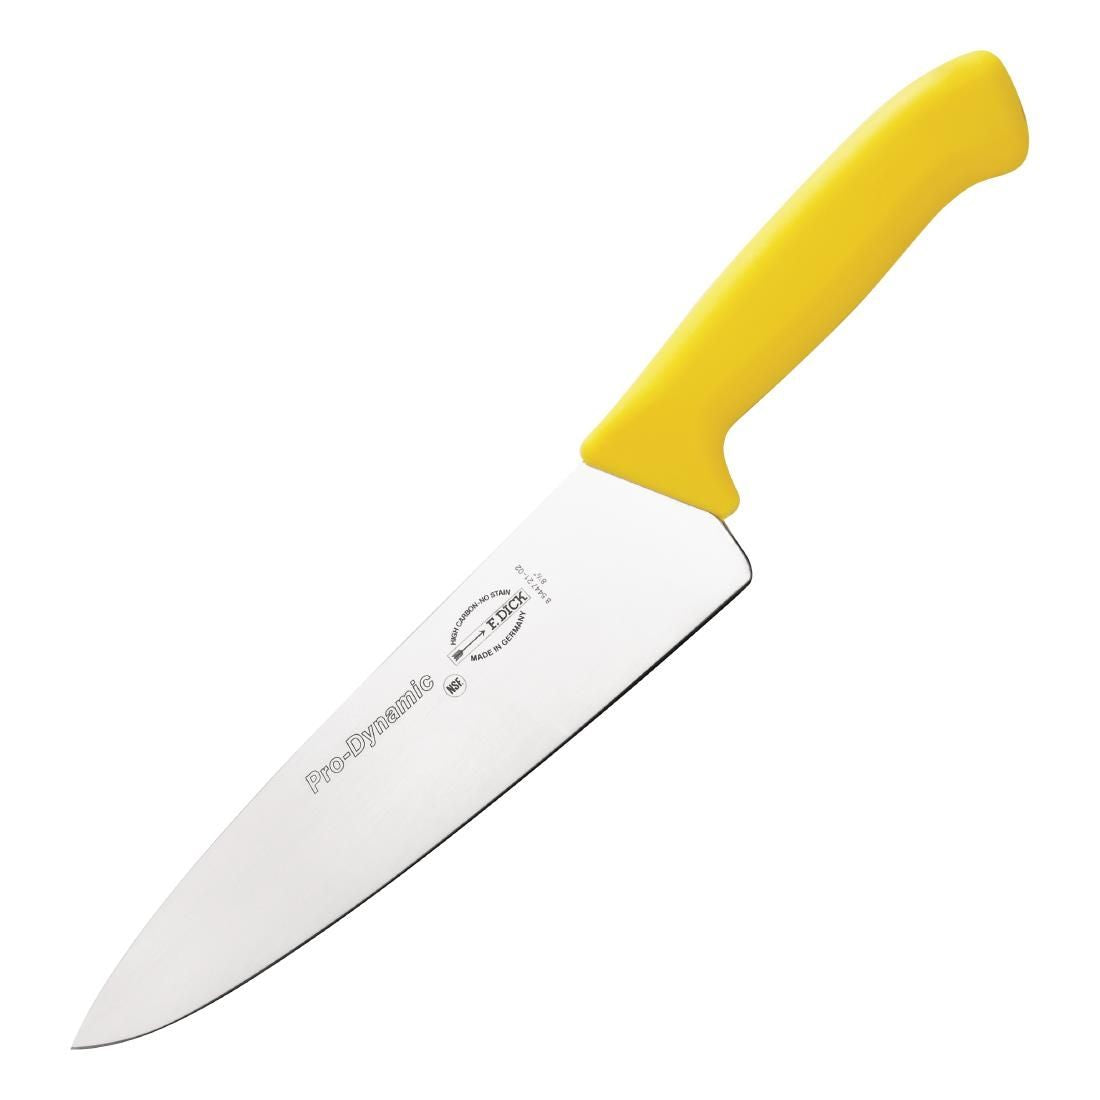 DL359 Dick Pro Dynamic HACCP Chefs Knife Yellow 21.5cm JD Catering Equipment Solutions Ltd